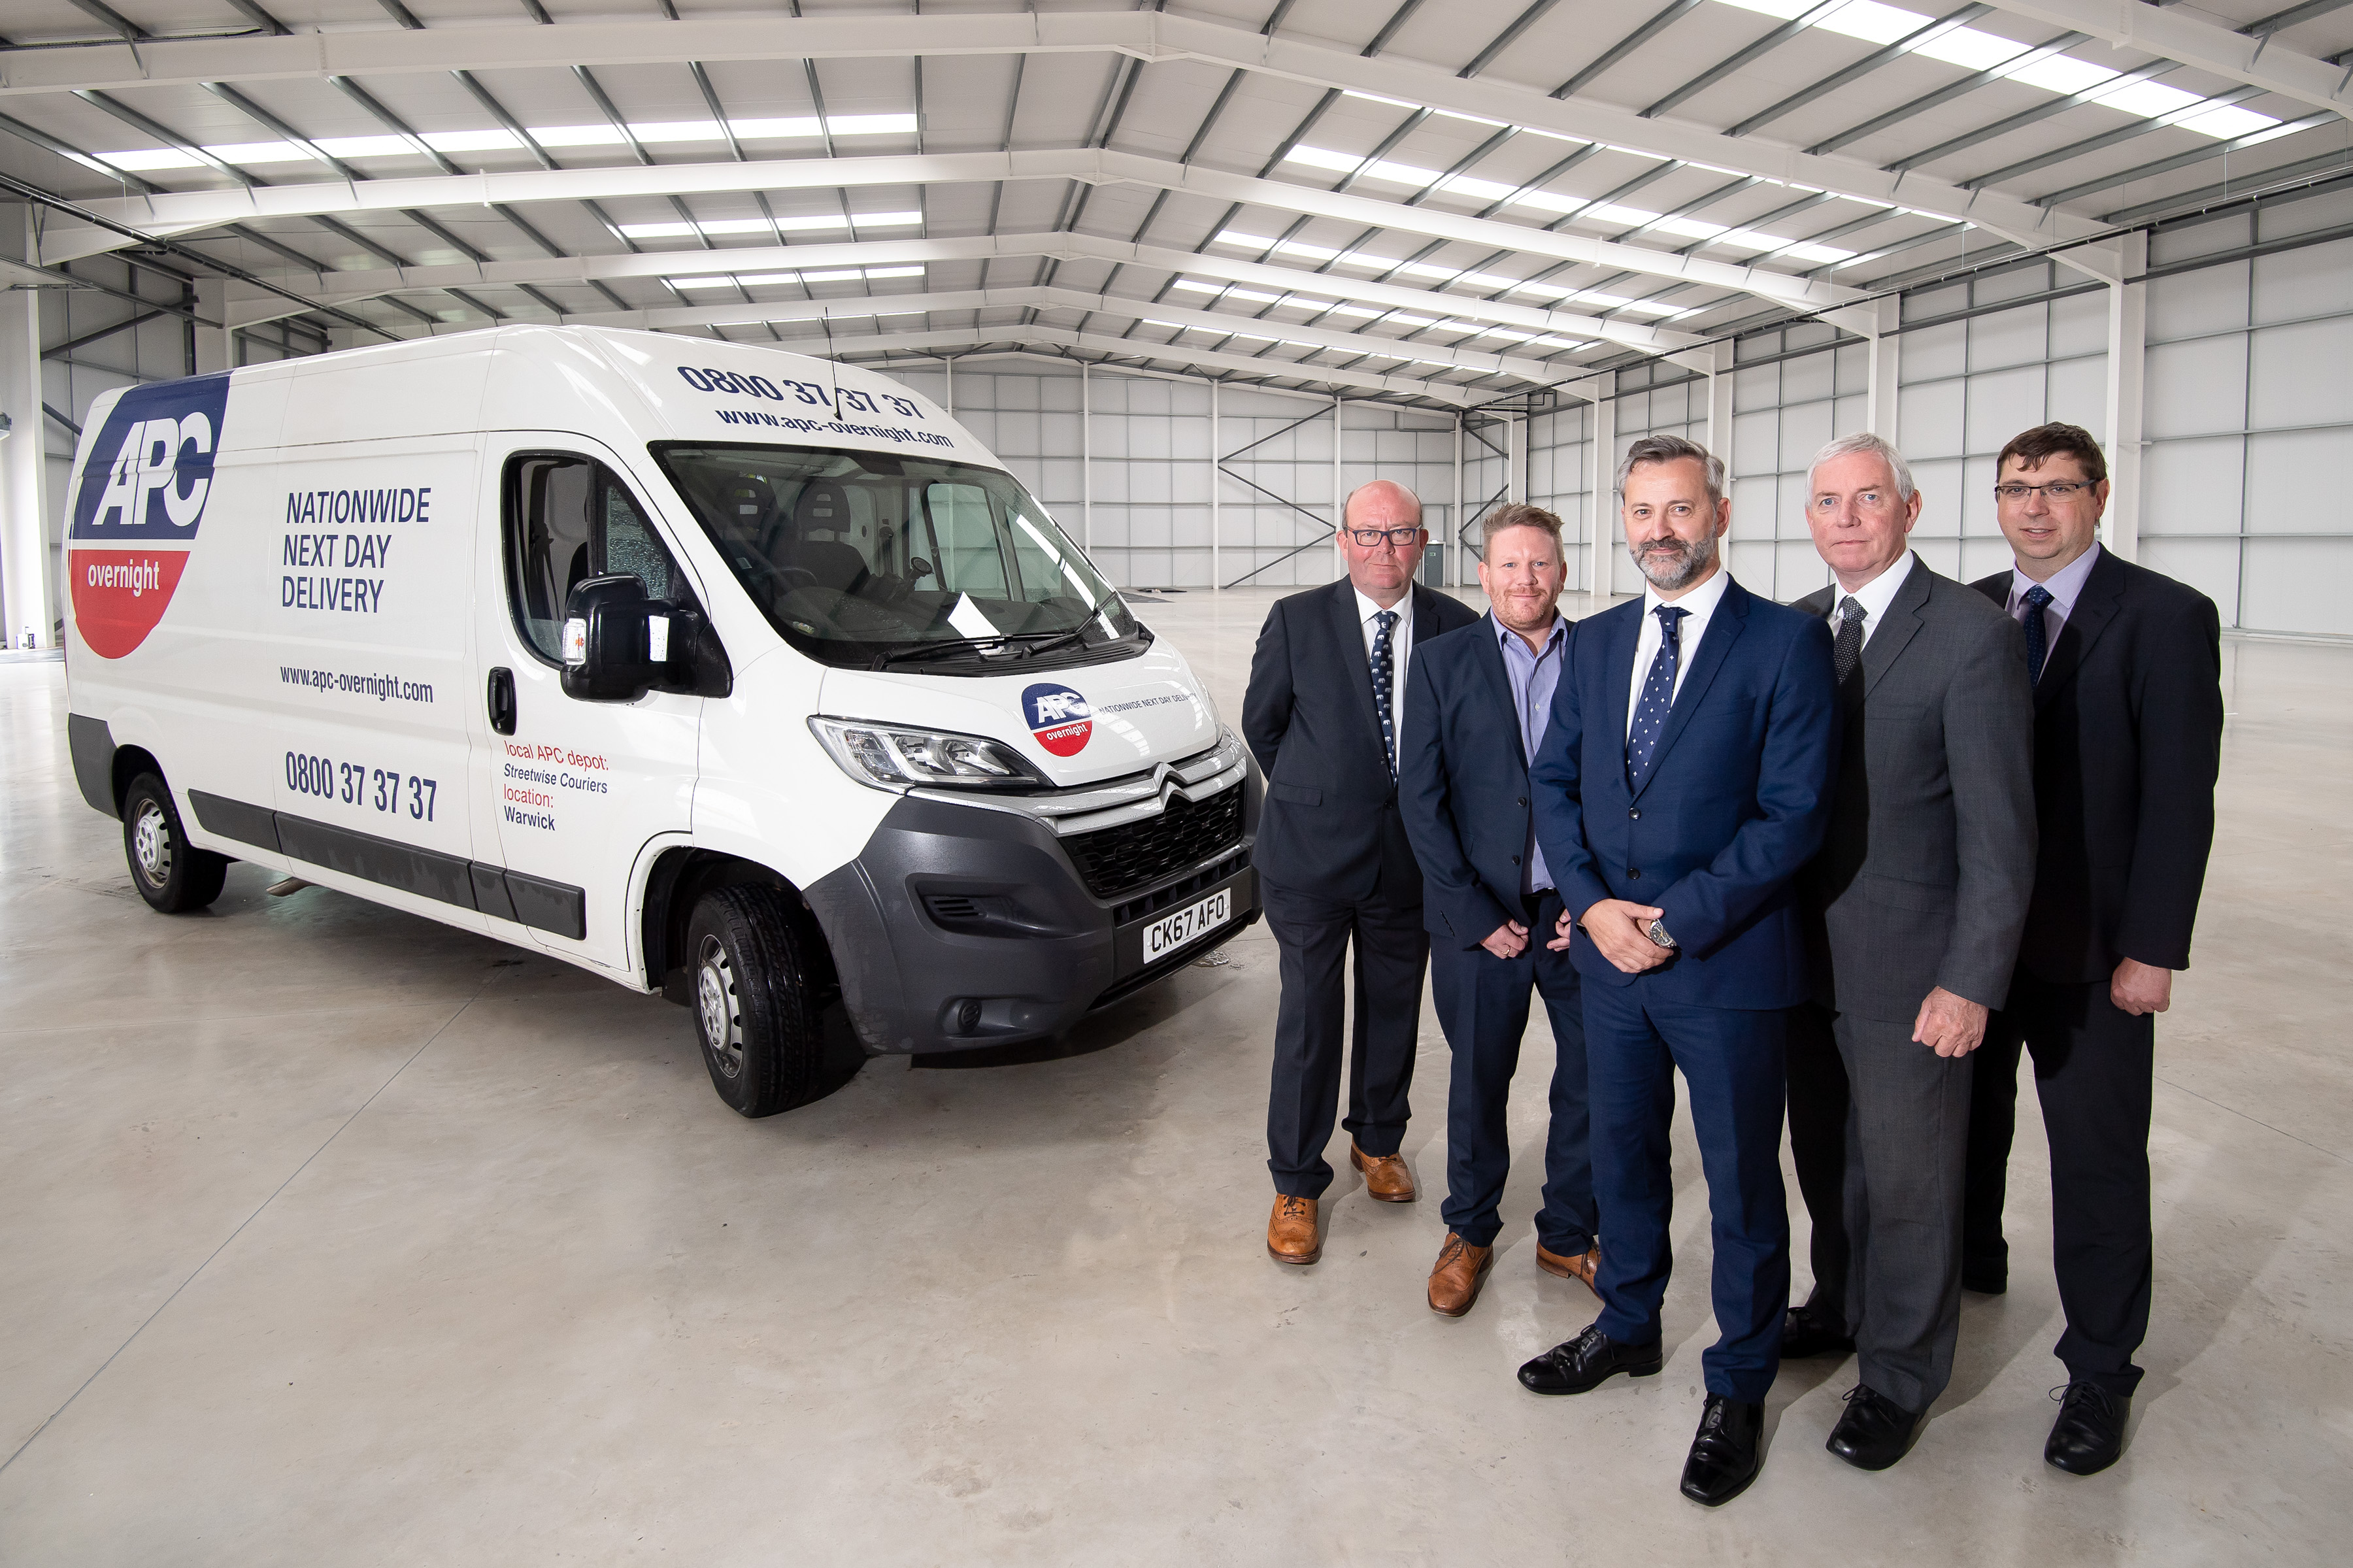 Wareing delivers new headquaters